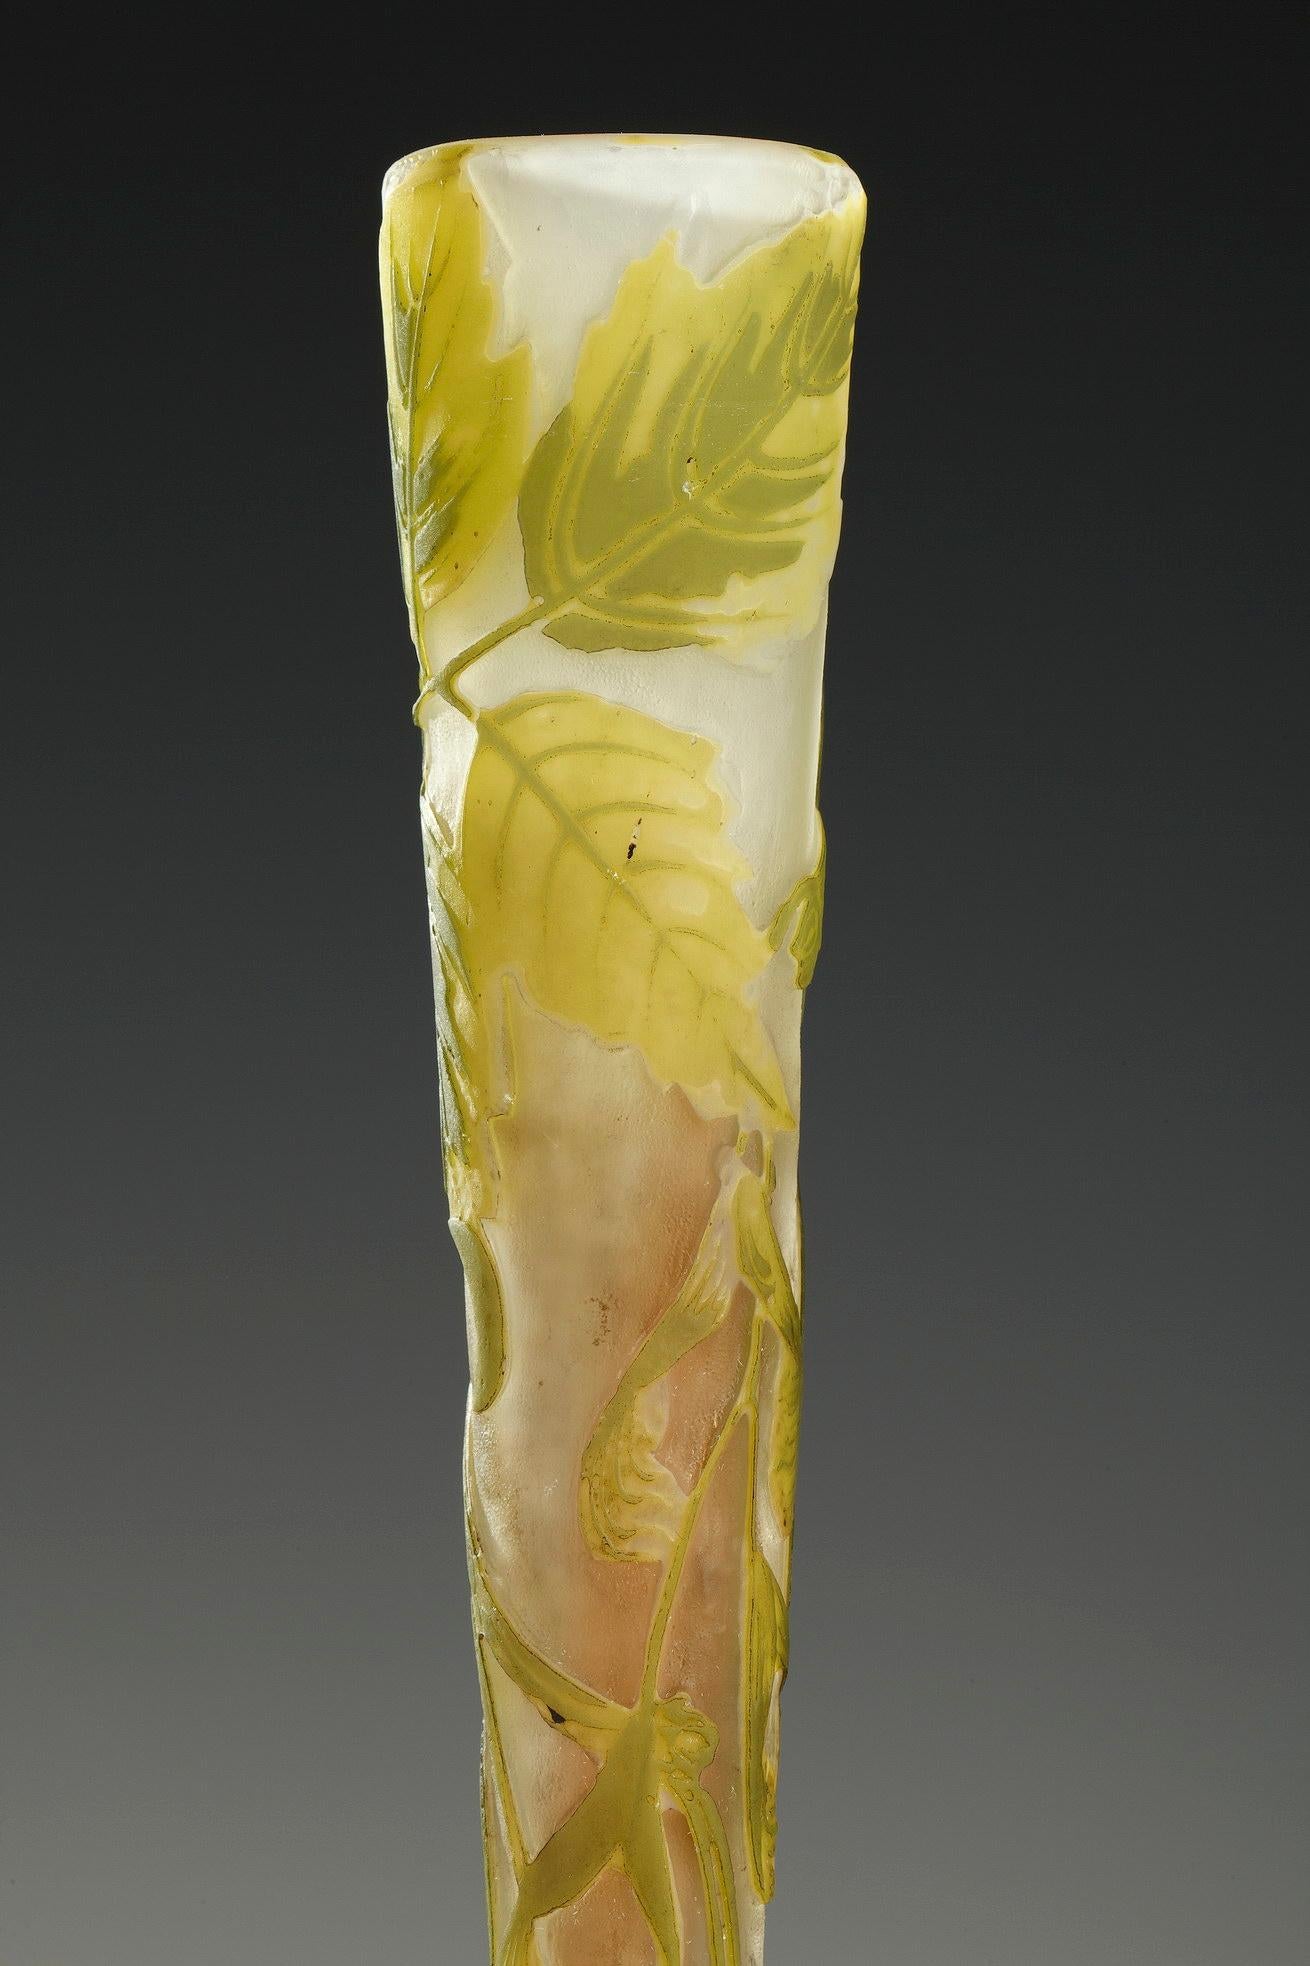 Soliflore vase in multilayer acid-etched glass, in green tones and decorated with leaves.

Emile Gallé (Nancy, 1846-1904), as a ceramist, carpenter and glassmaker, is one of the founding artists of Art Nouveau. His father, Charles Gallé